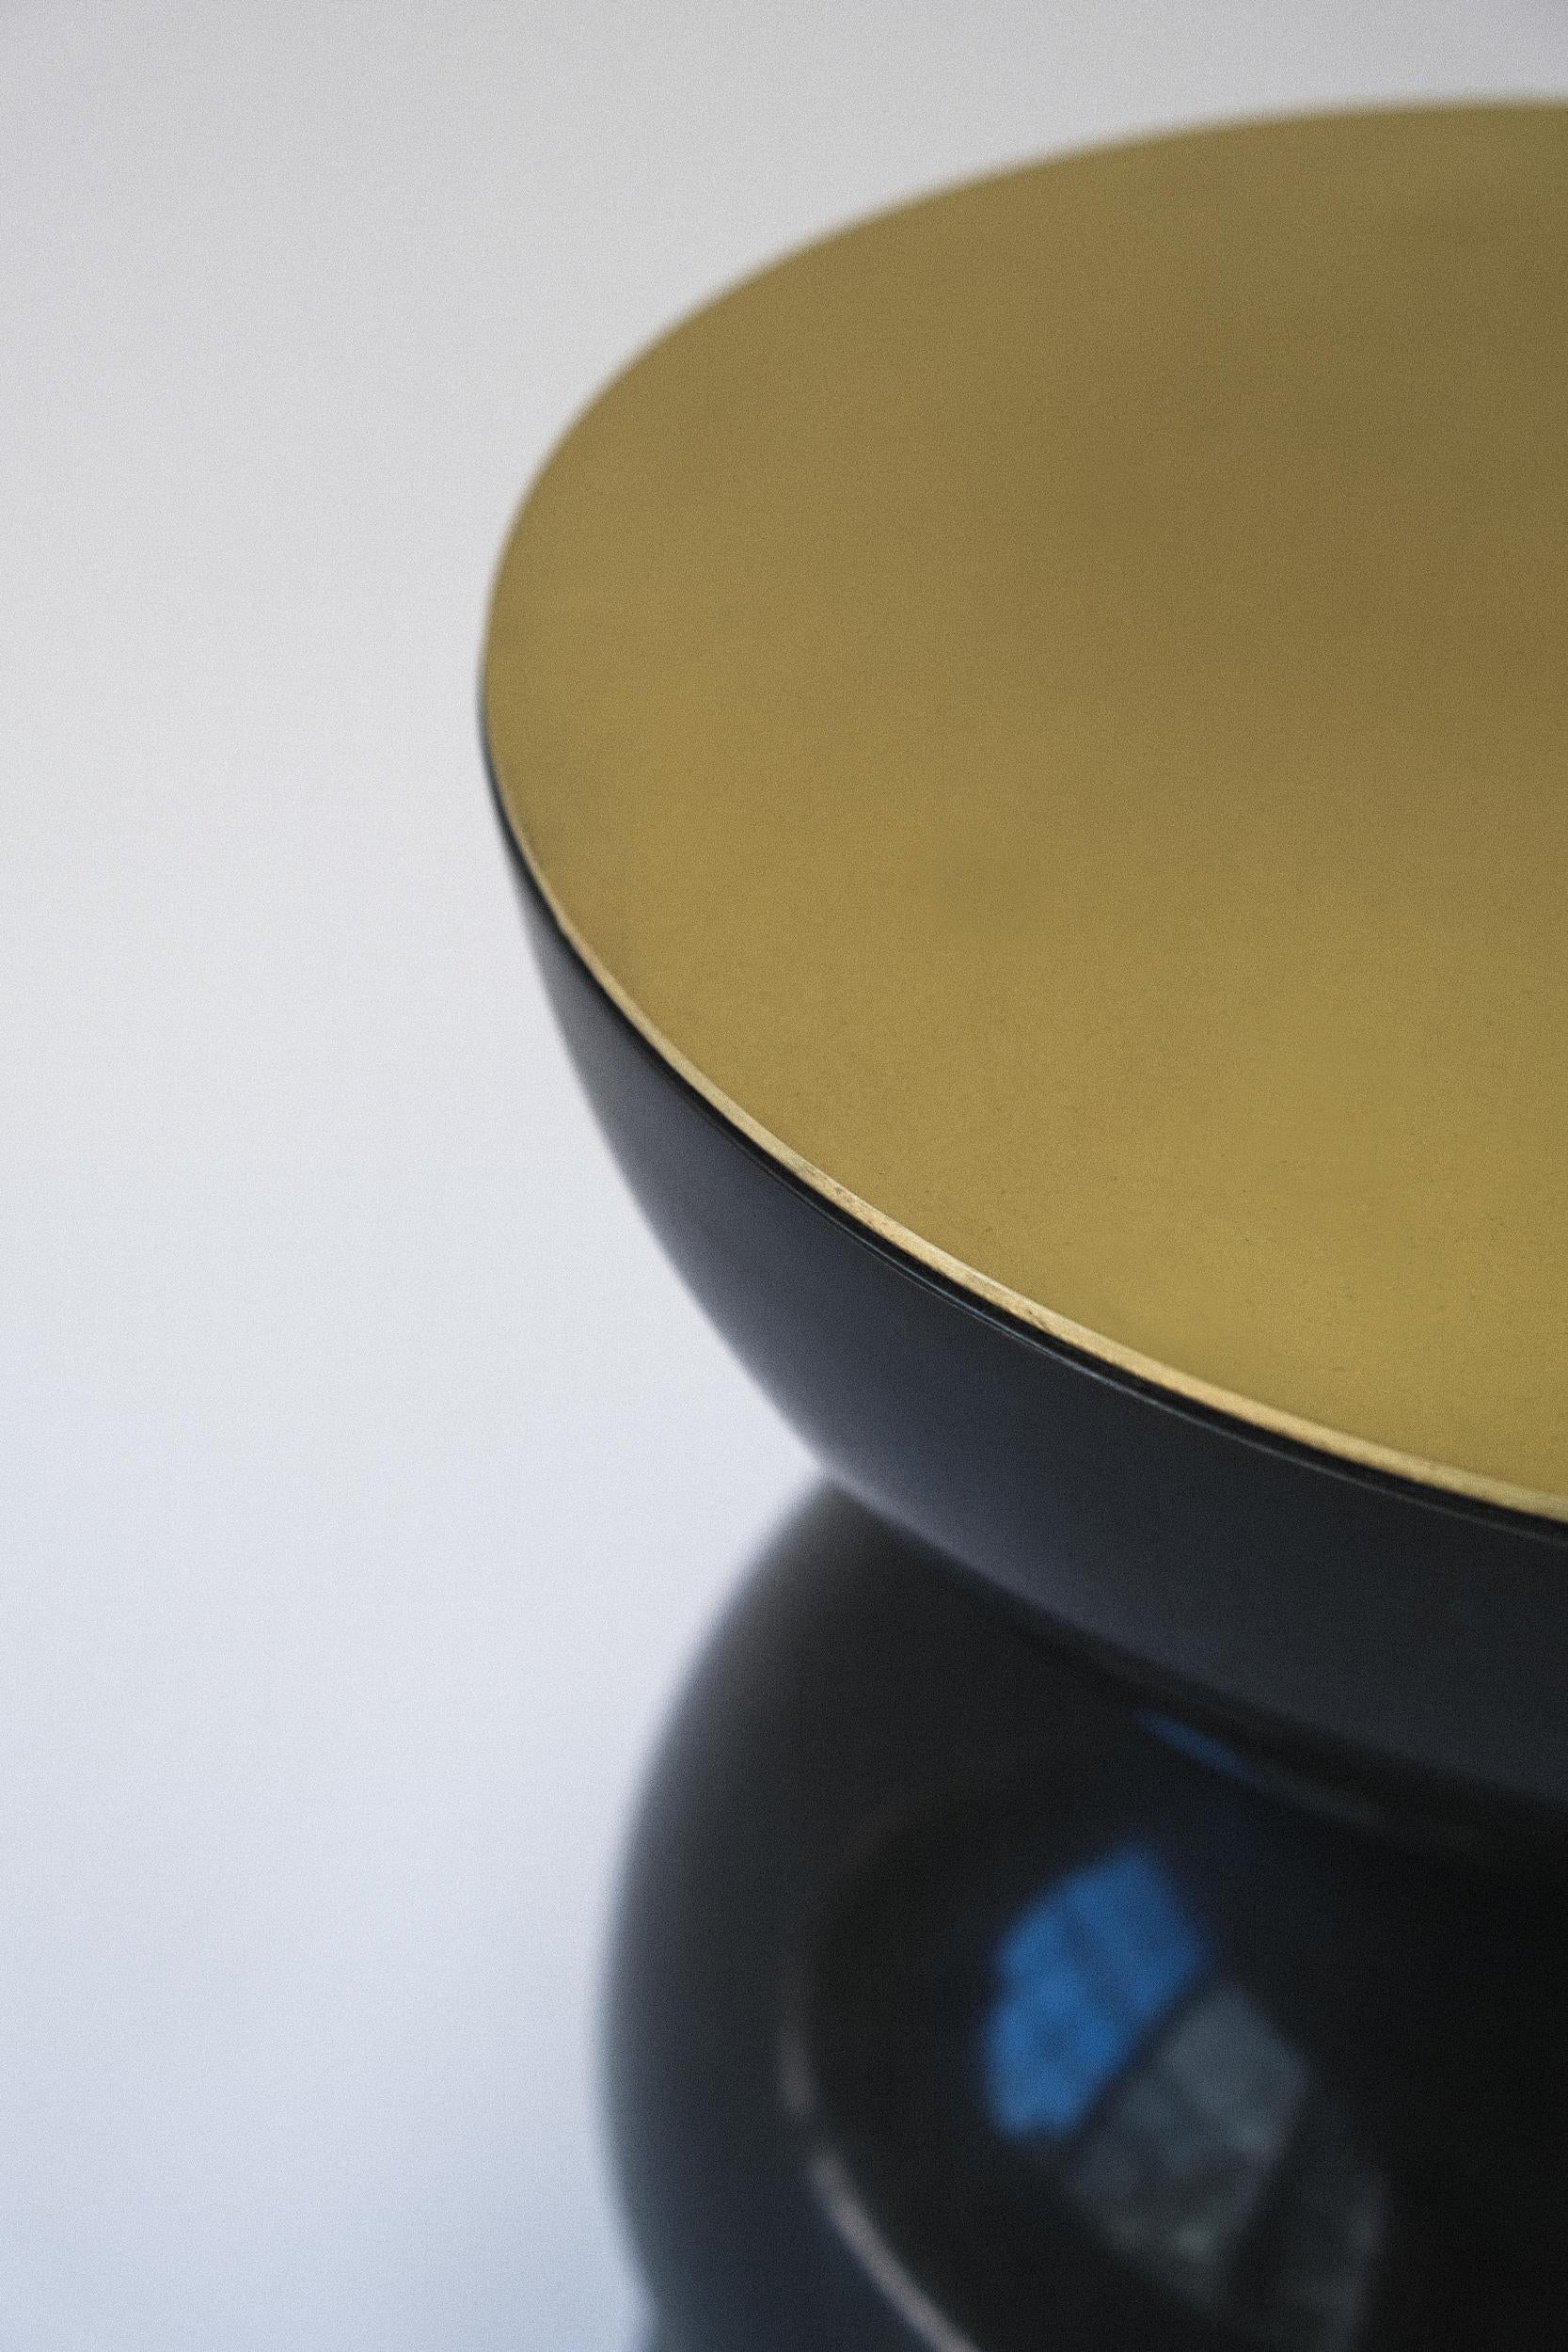 Hand-made in Arvo Ray Studio's NYC workshop.

A welded spun Steel base with lacquered Natural Brass top.

Available for customization in Brass, Brushed Bronze, Aluminum, or a solid color of your choice